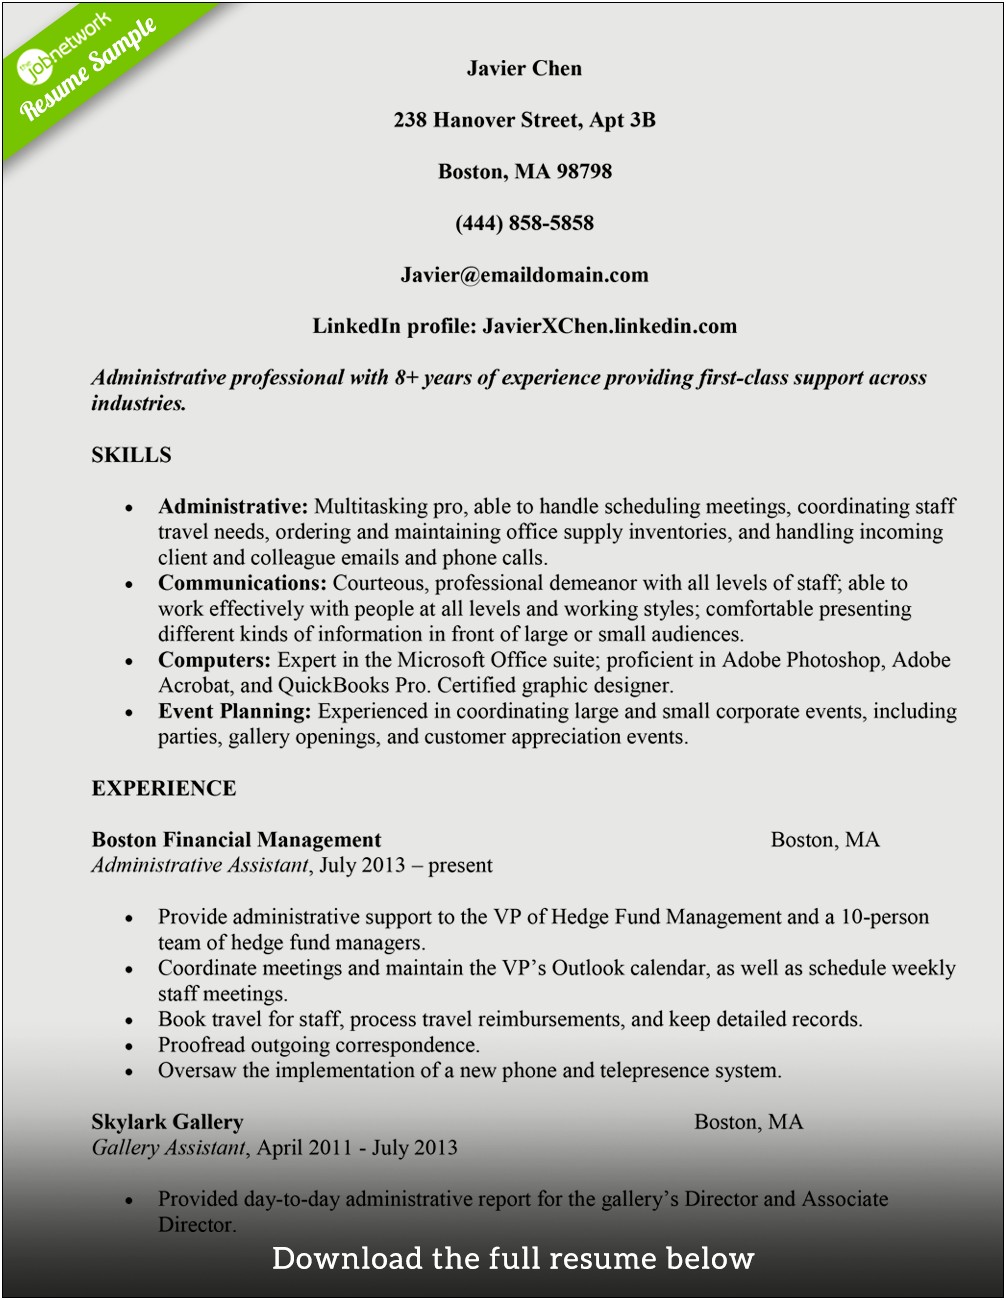 Sample Resume For Administrative Assistant In Construction